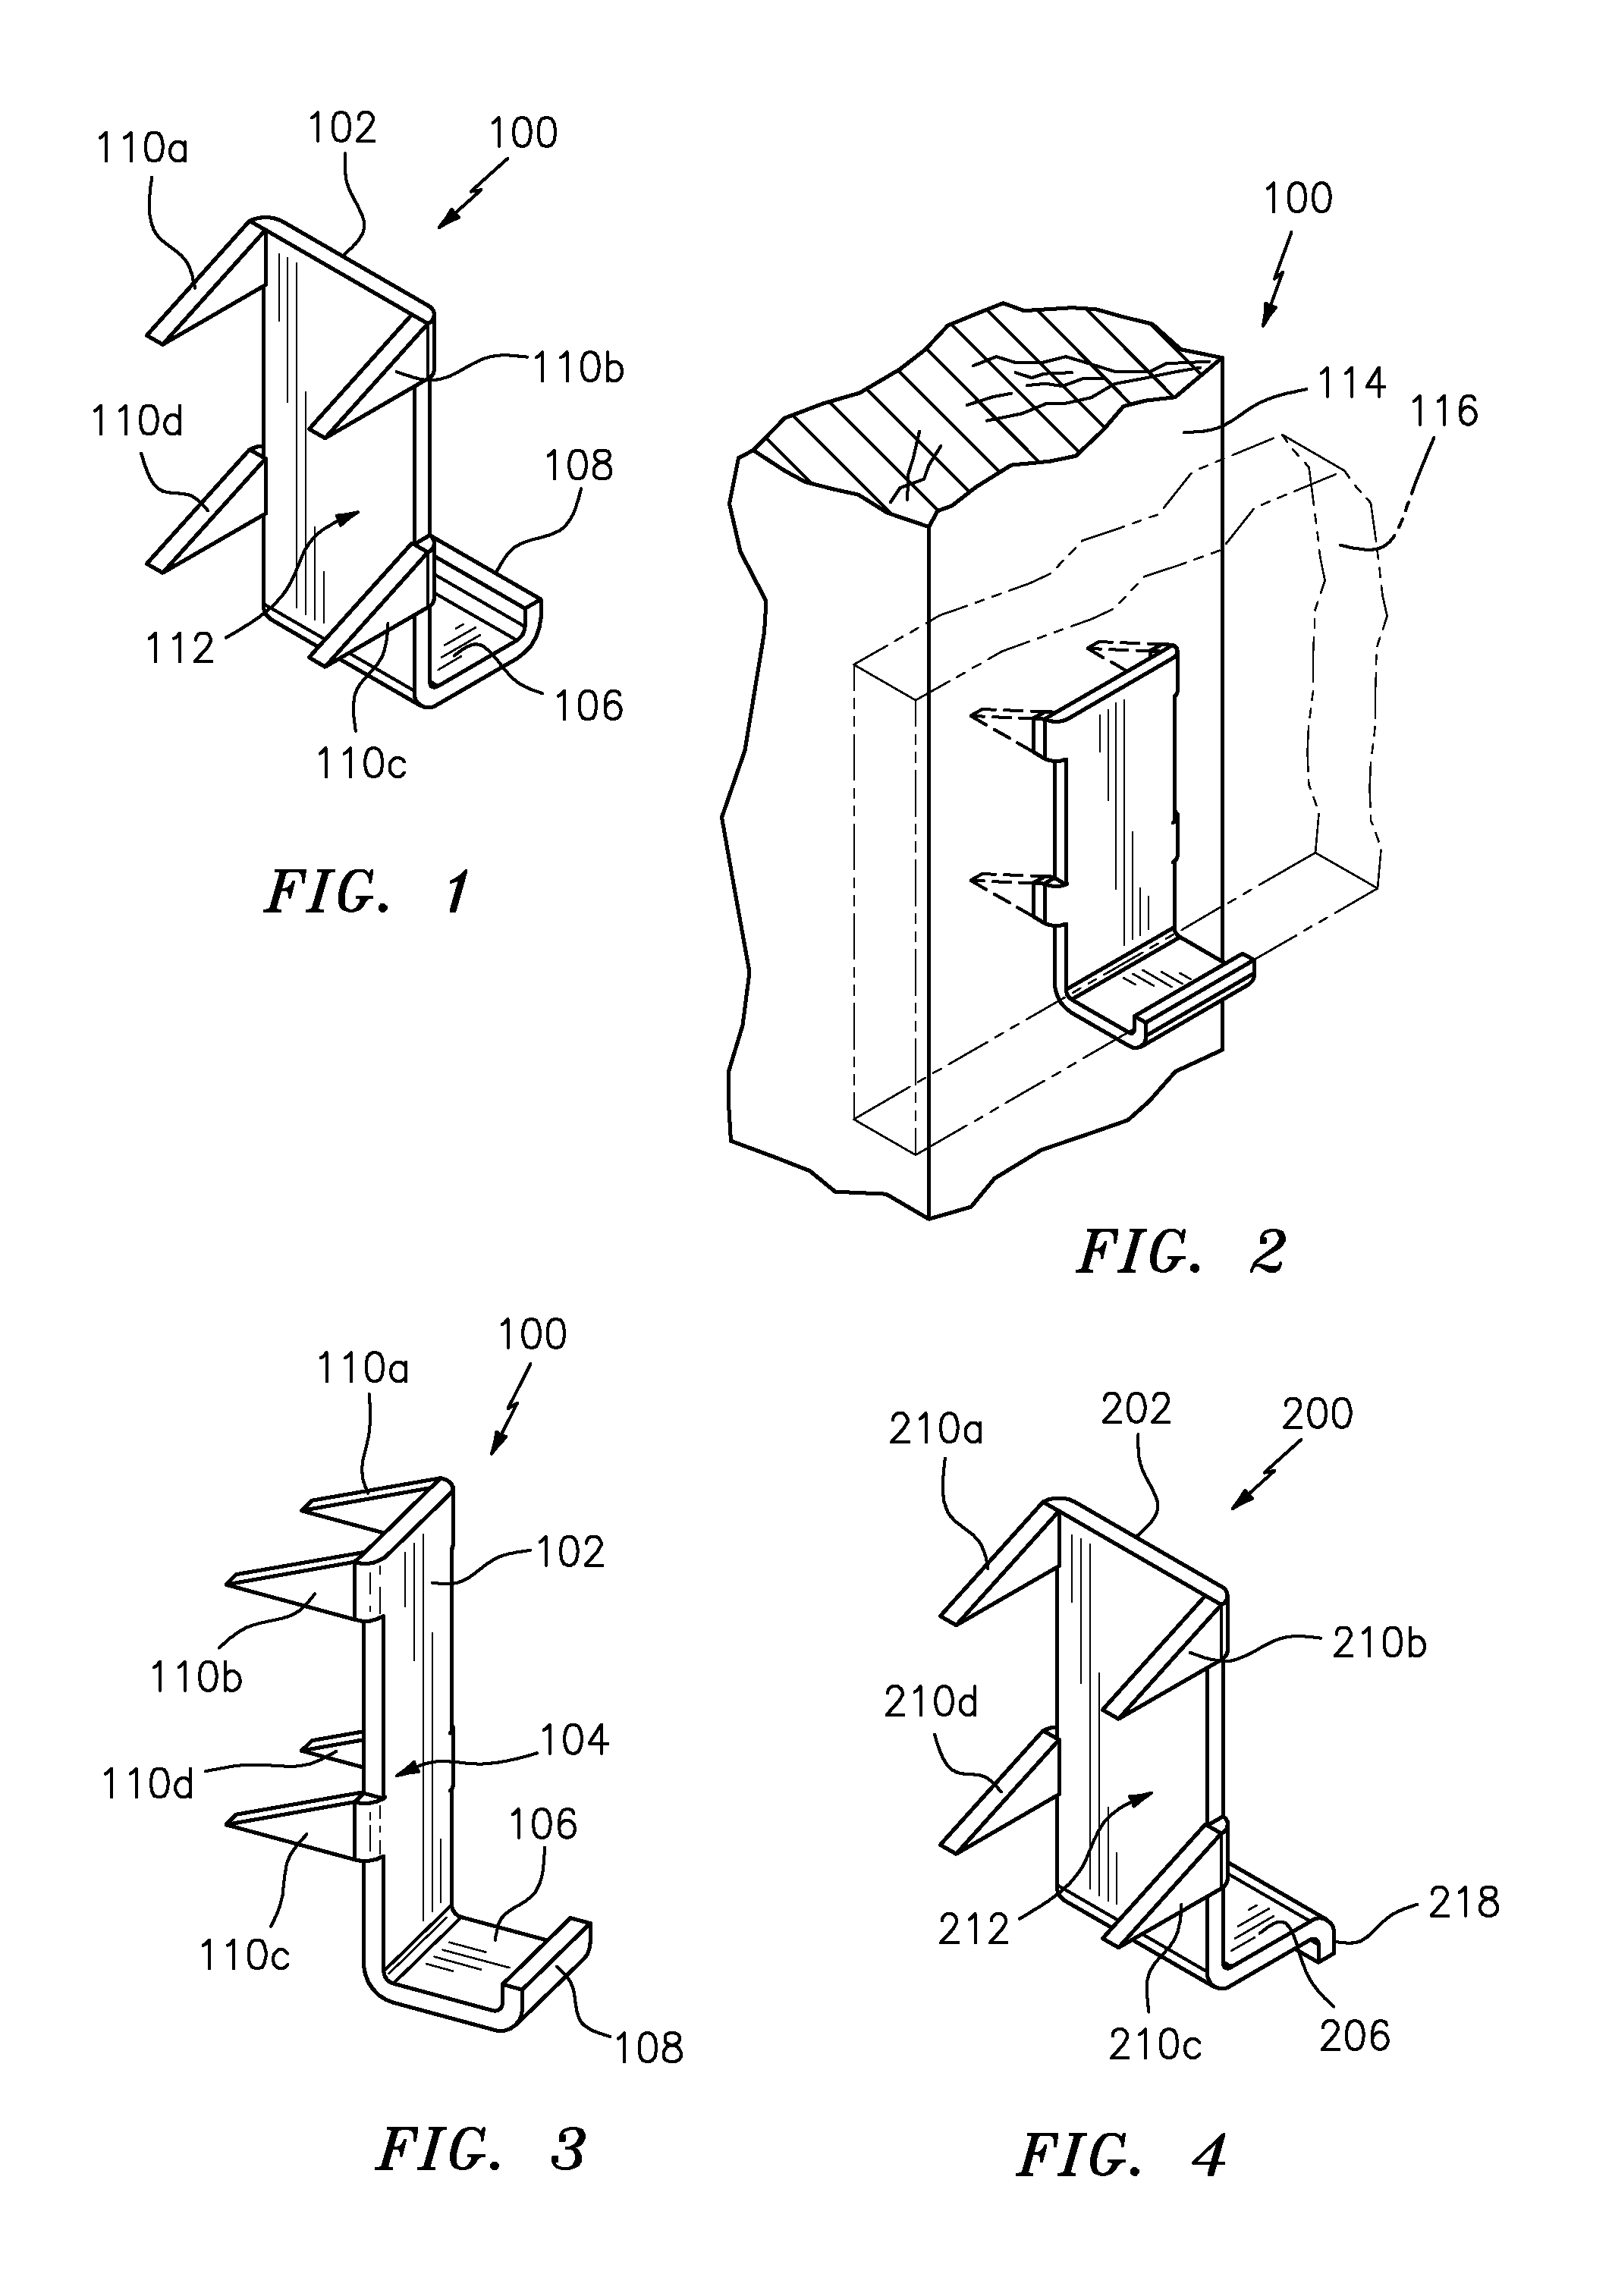 Method of supporting drywall